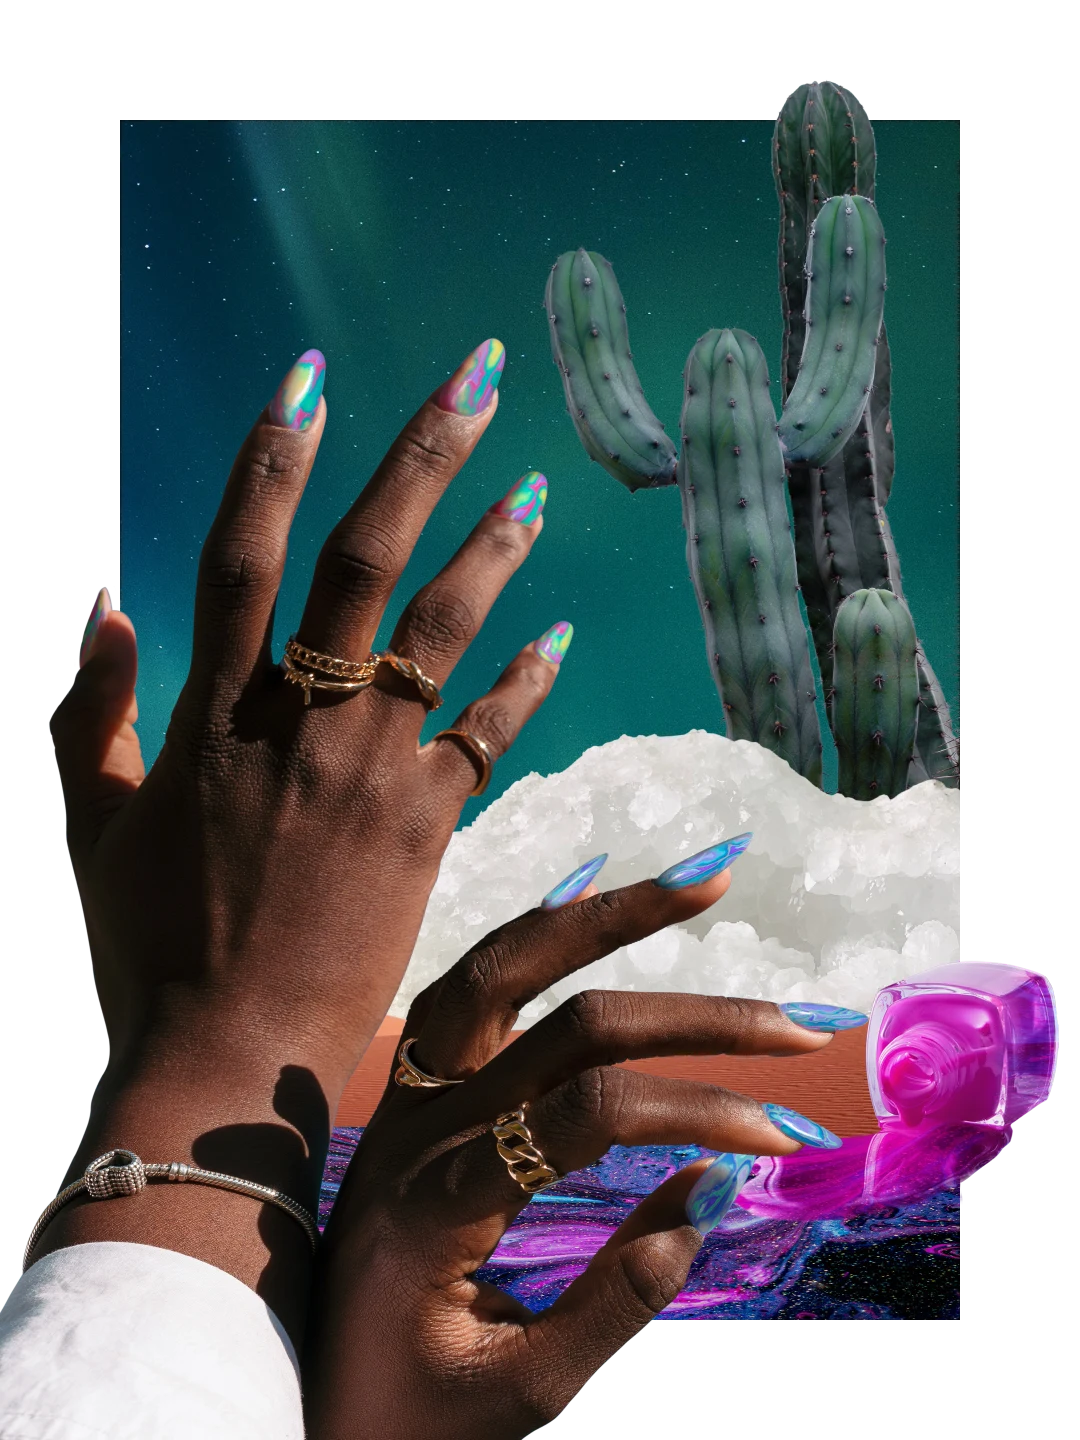 Collage of nail-themed items. Blue, pink and purple varnish spills from a bottle on the right. A Black woman’s hands, with multicoloured fingernails, are on the left. A large cactus is on the top right-hand side, with salt crystals underneath.
